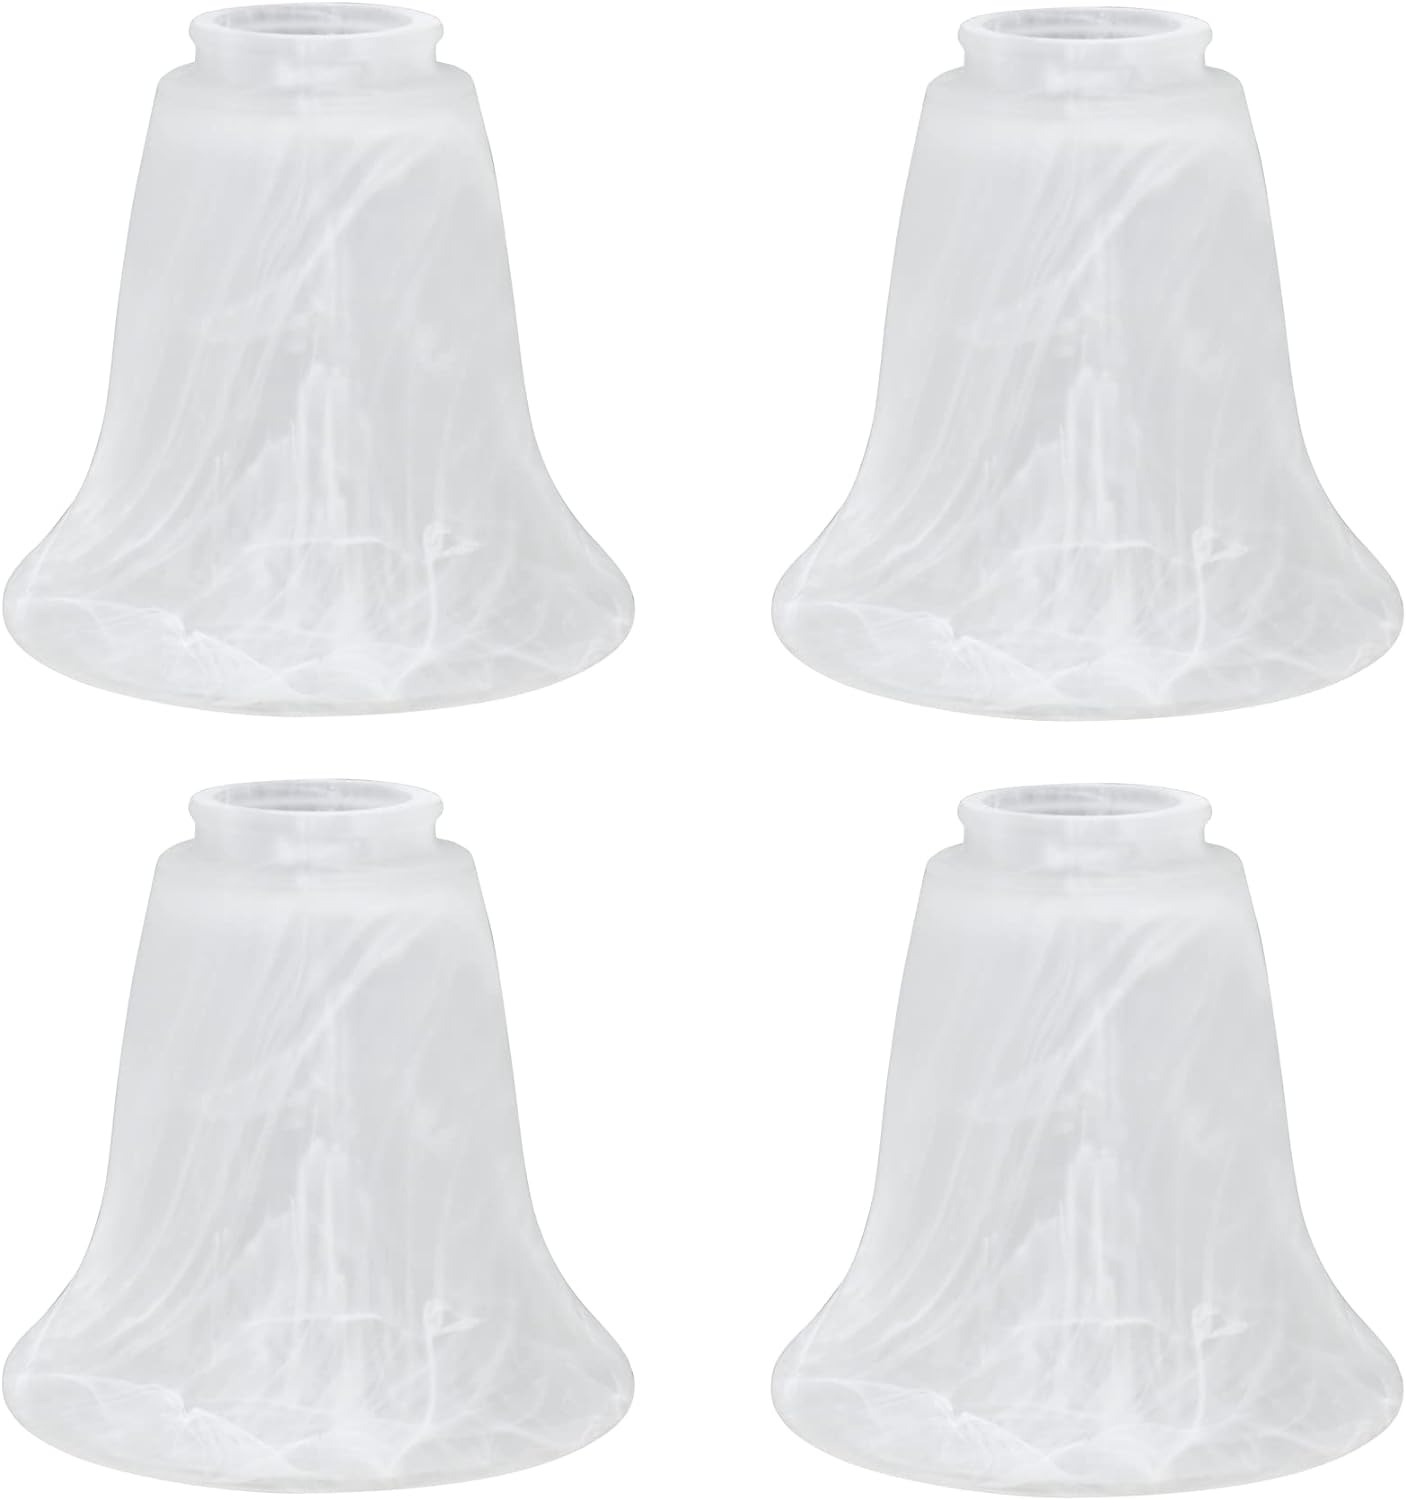 Transitional Alabaster Glass Shades, 4 Pack